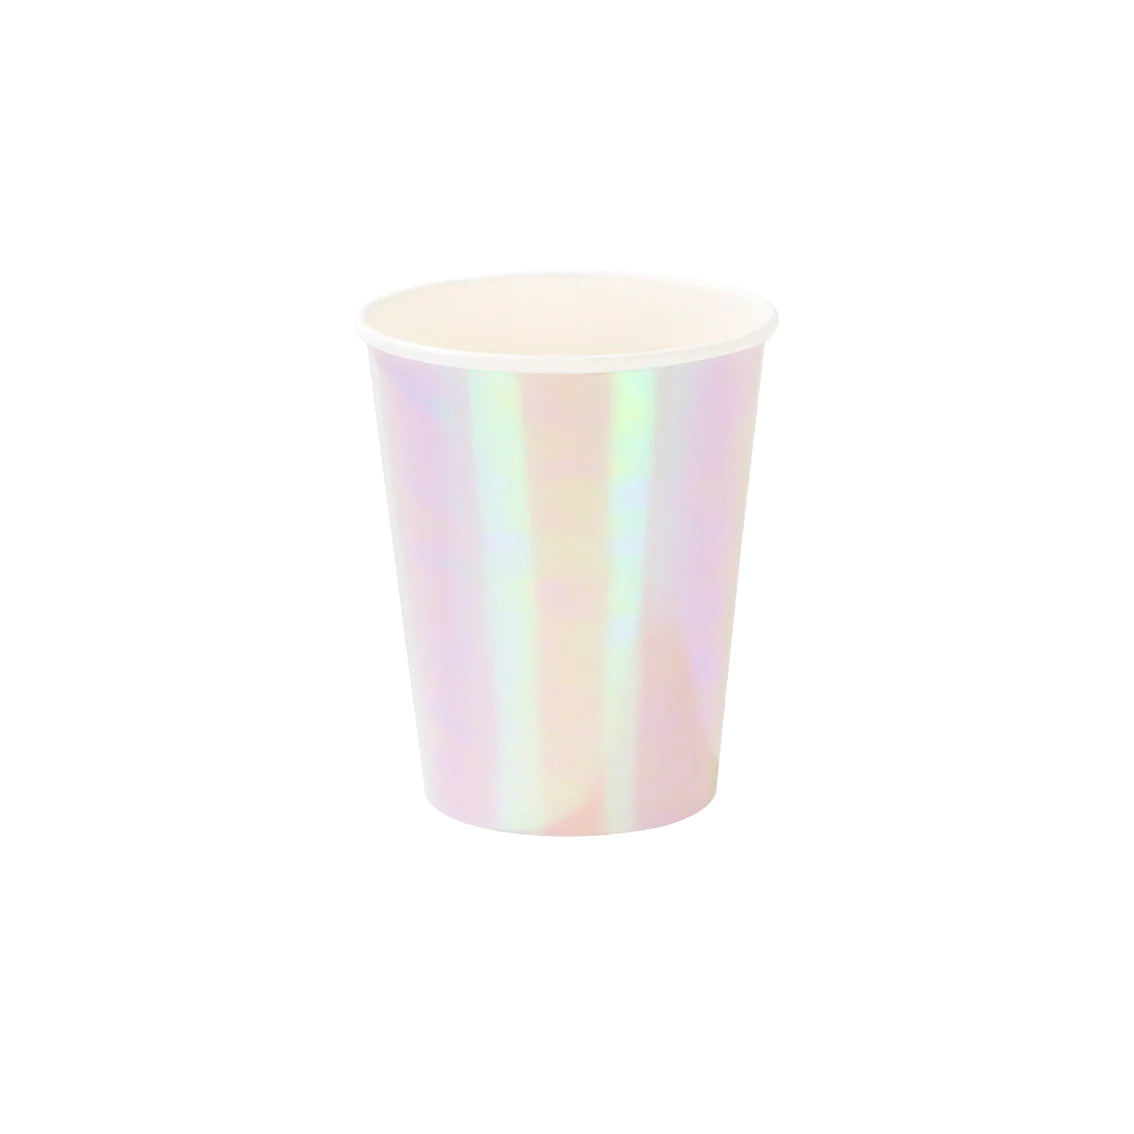 We Heart Pastel Iridescent Paper Cups - 12 Pack by Talking Tables. Unicorn Party Paper Cups. Mermaid Party Disposable Cups. Decor for Bachelorette Party. Wedding Decor